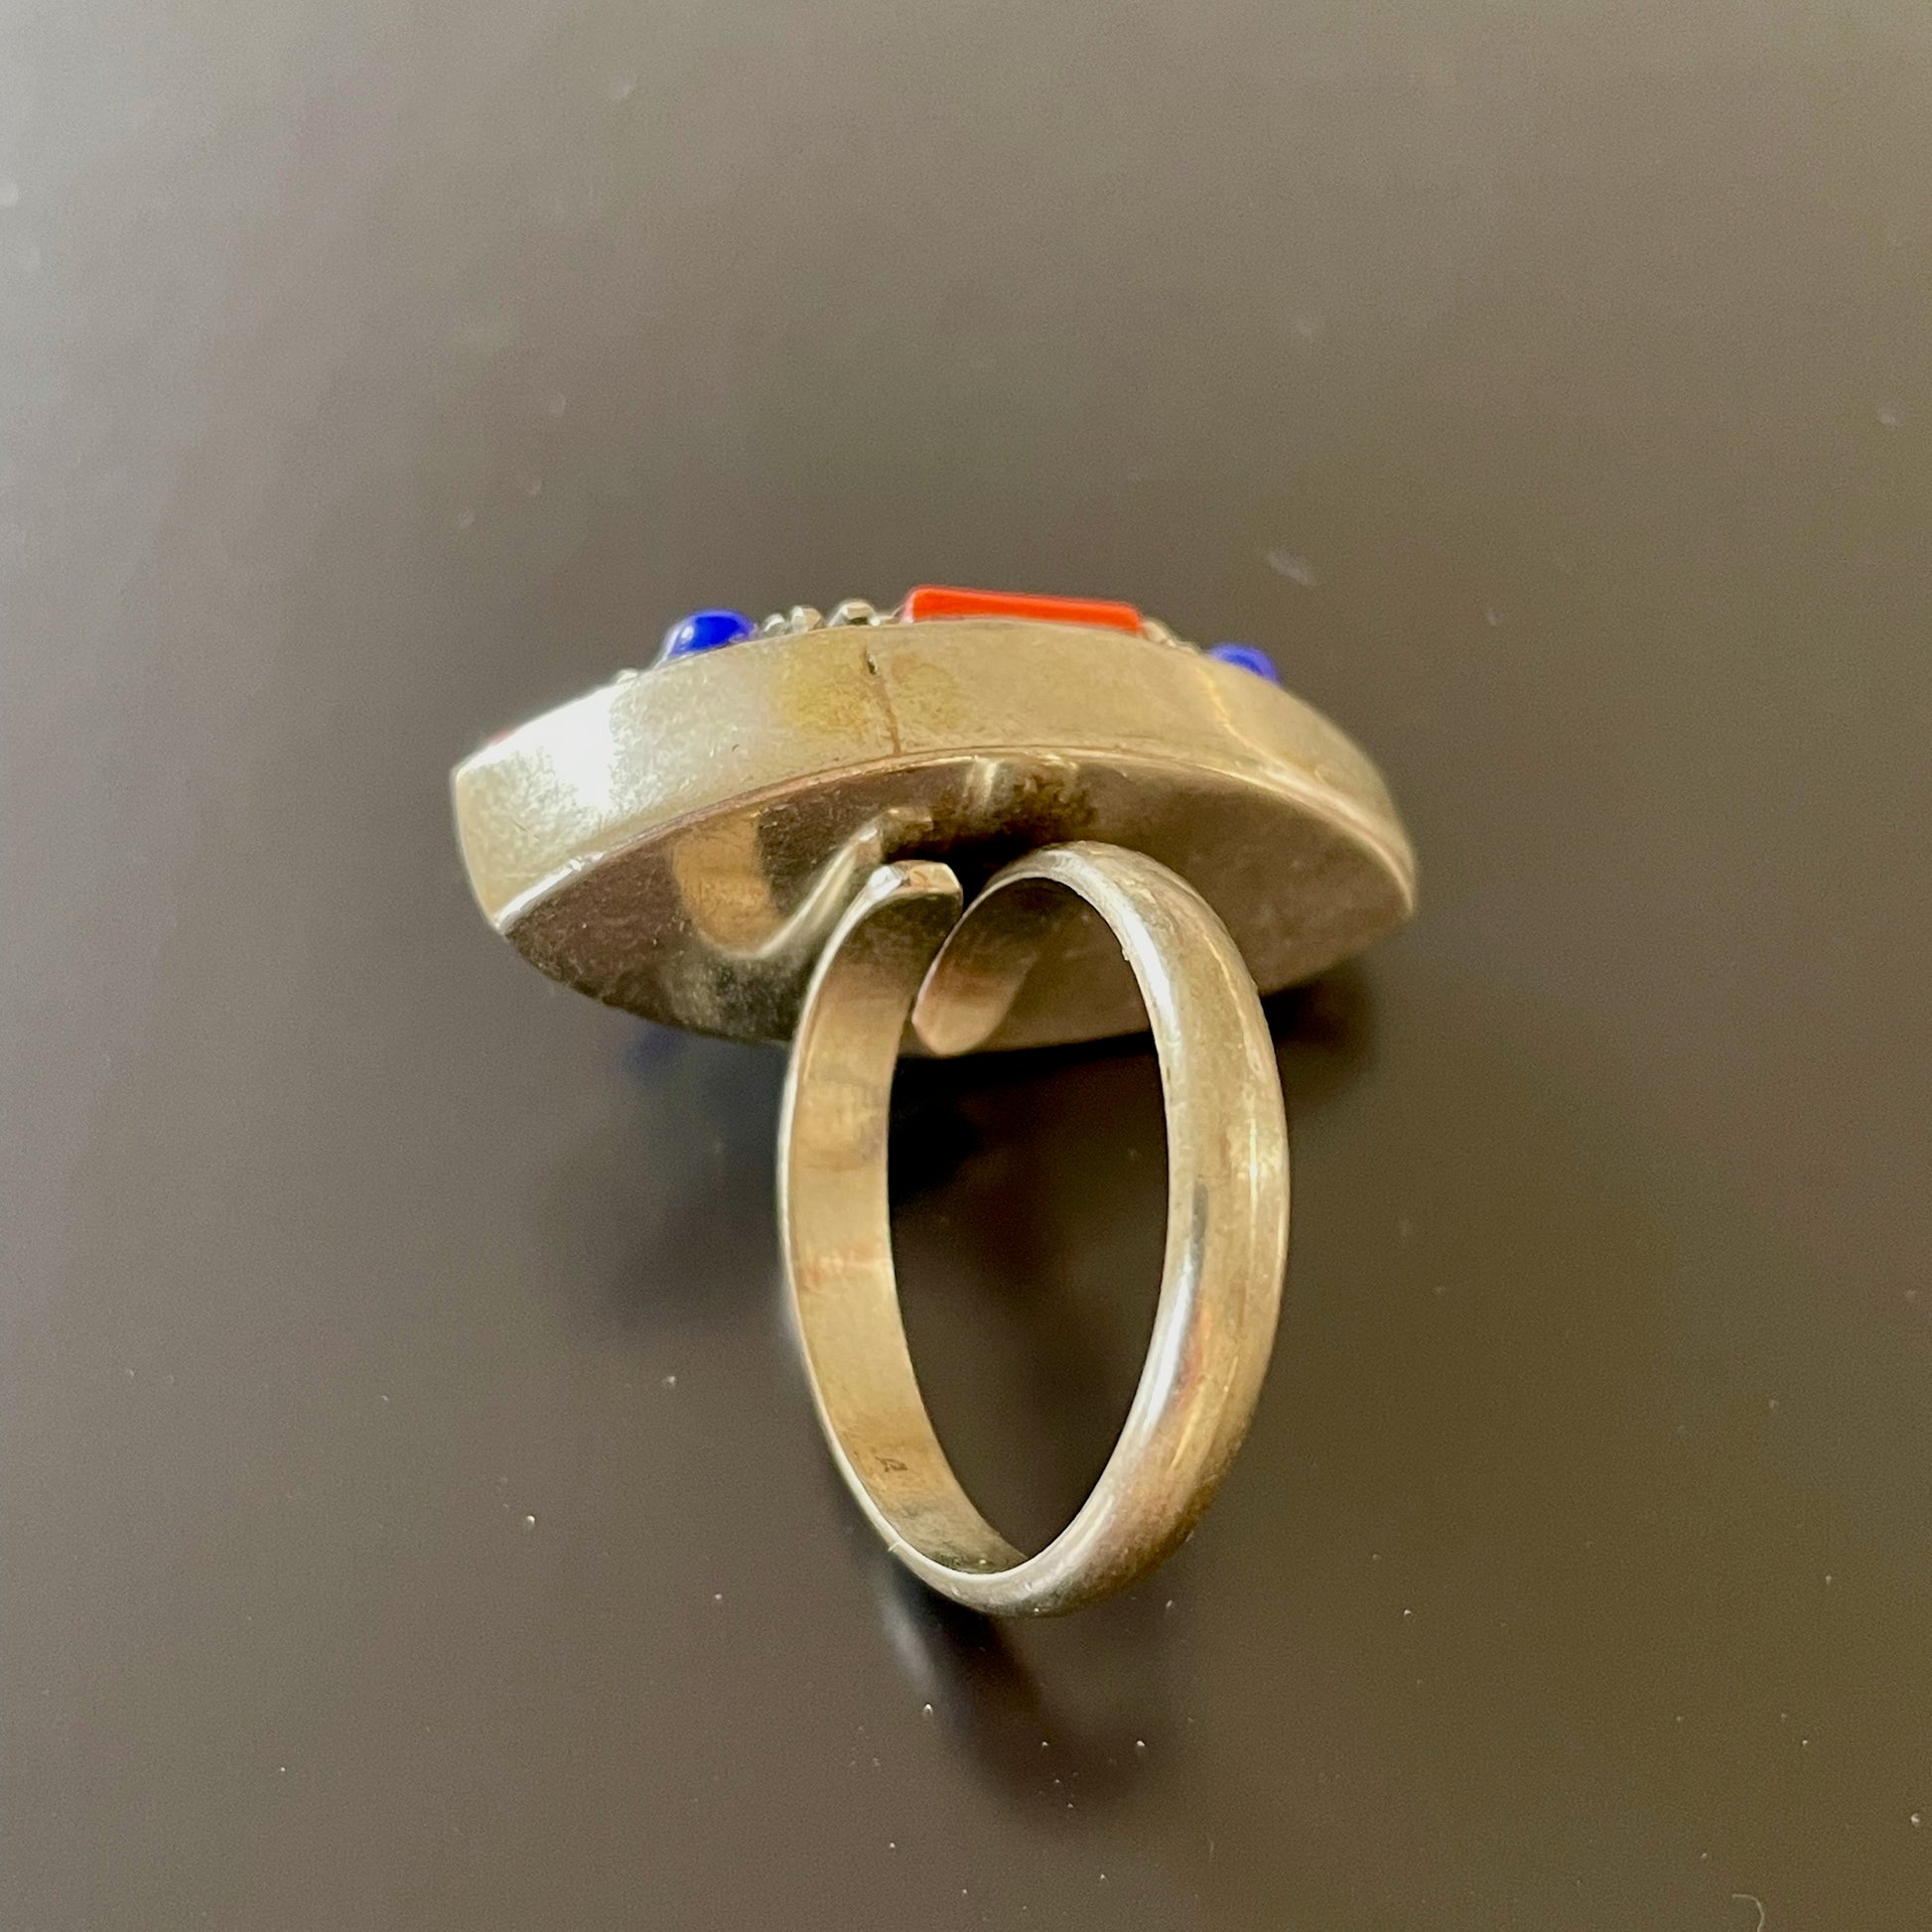 Berber Shield Ring with Red & Blue Stones back